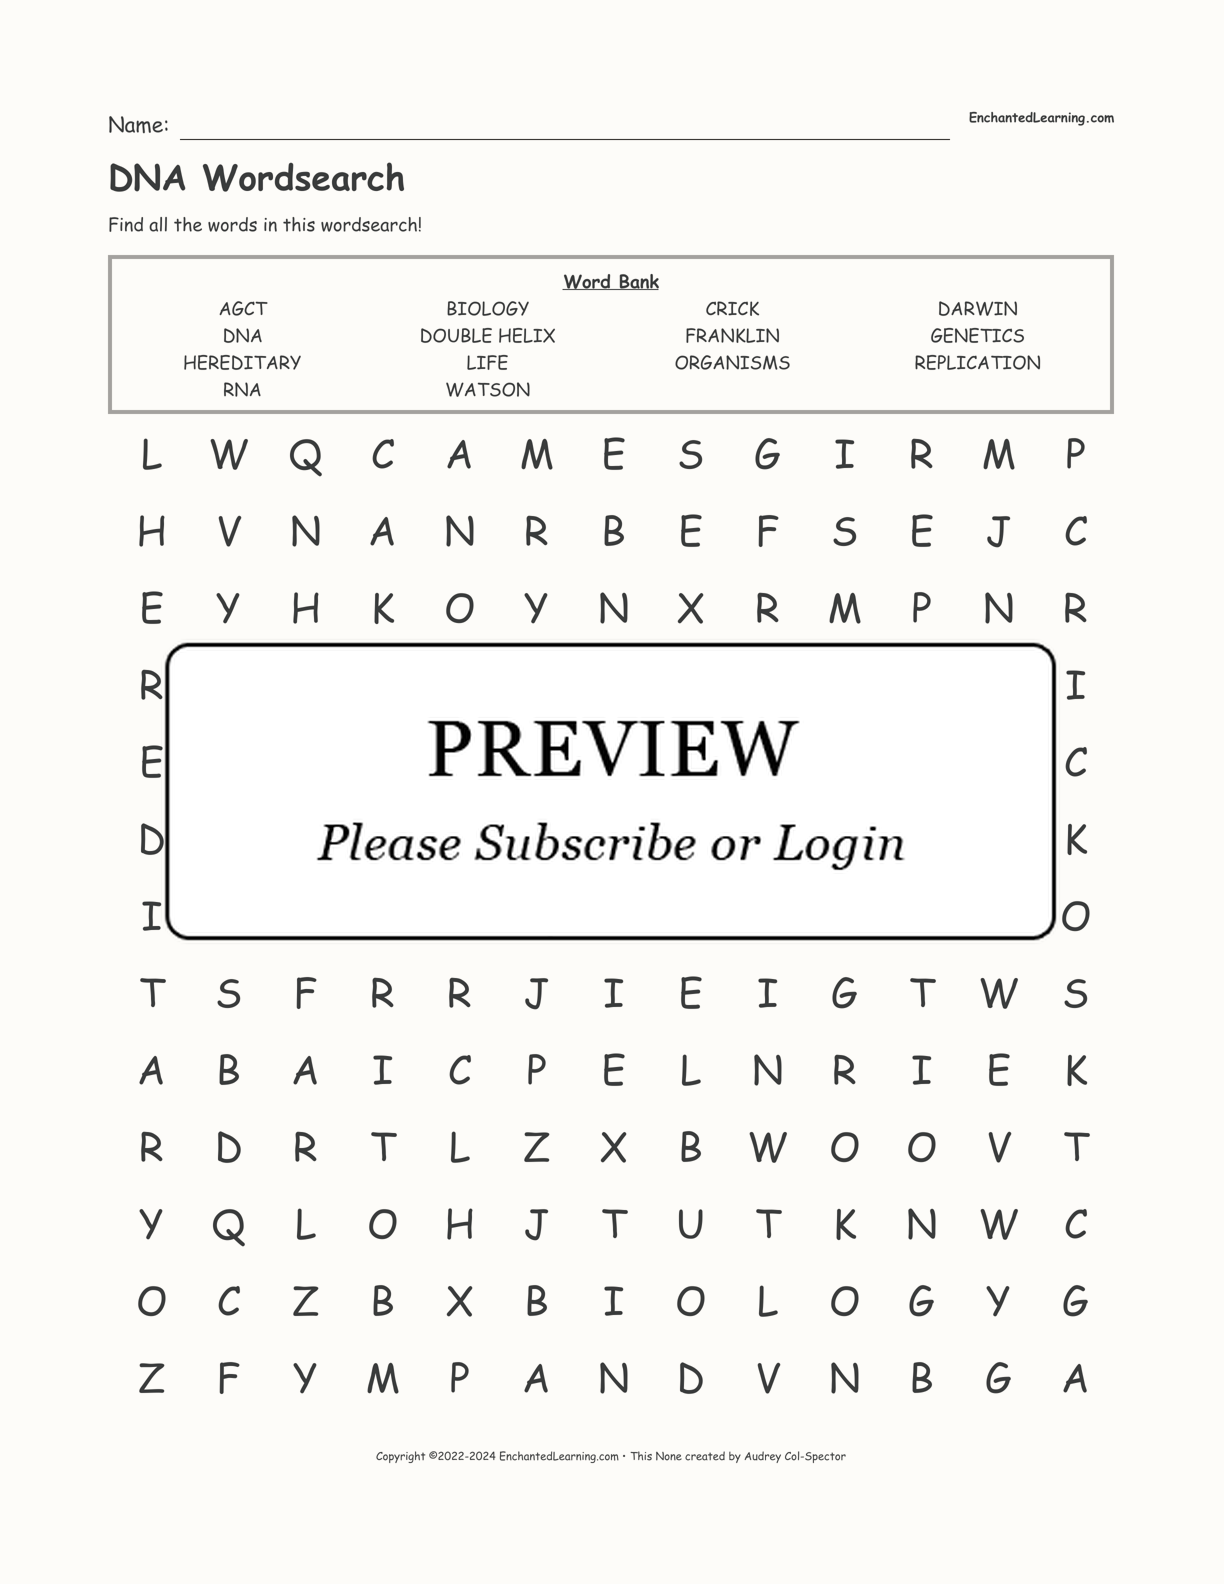 DNA Wordsearch interactive worksheet page 1